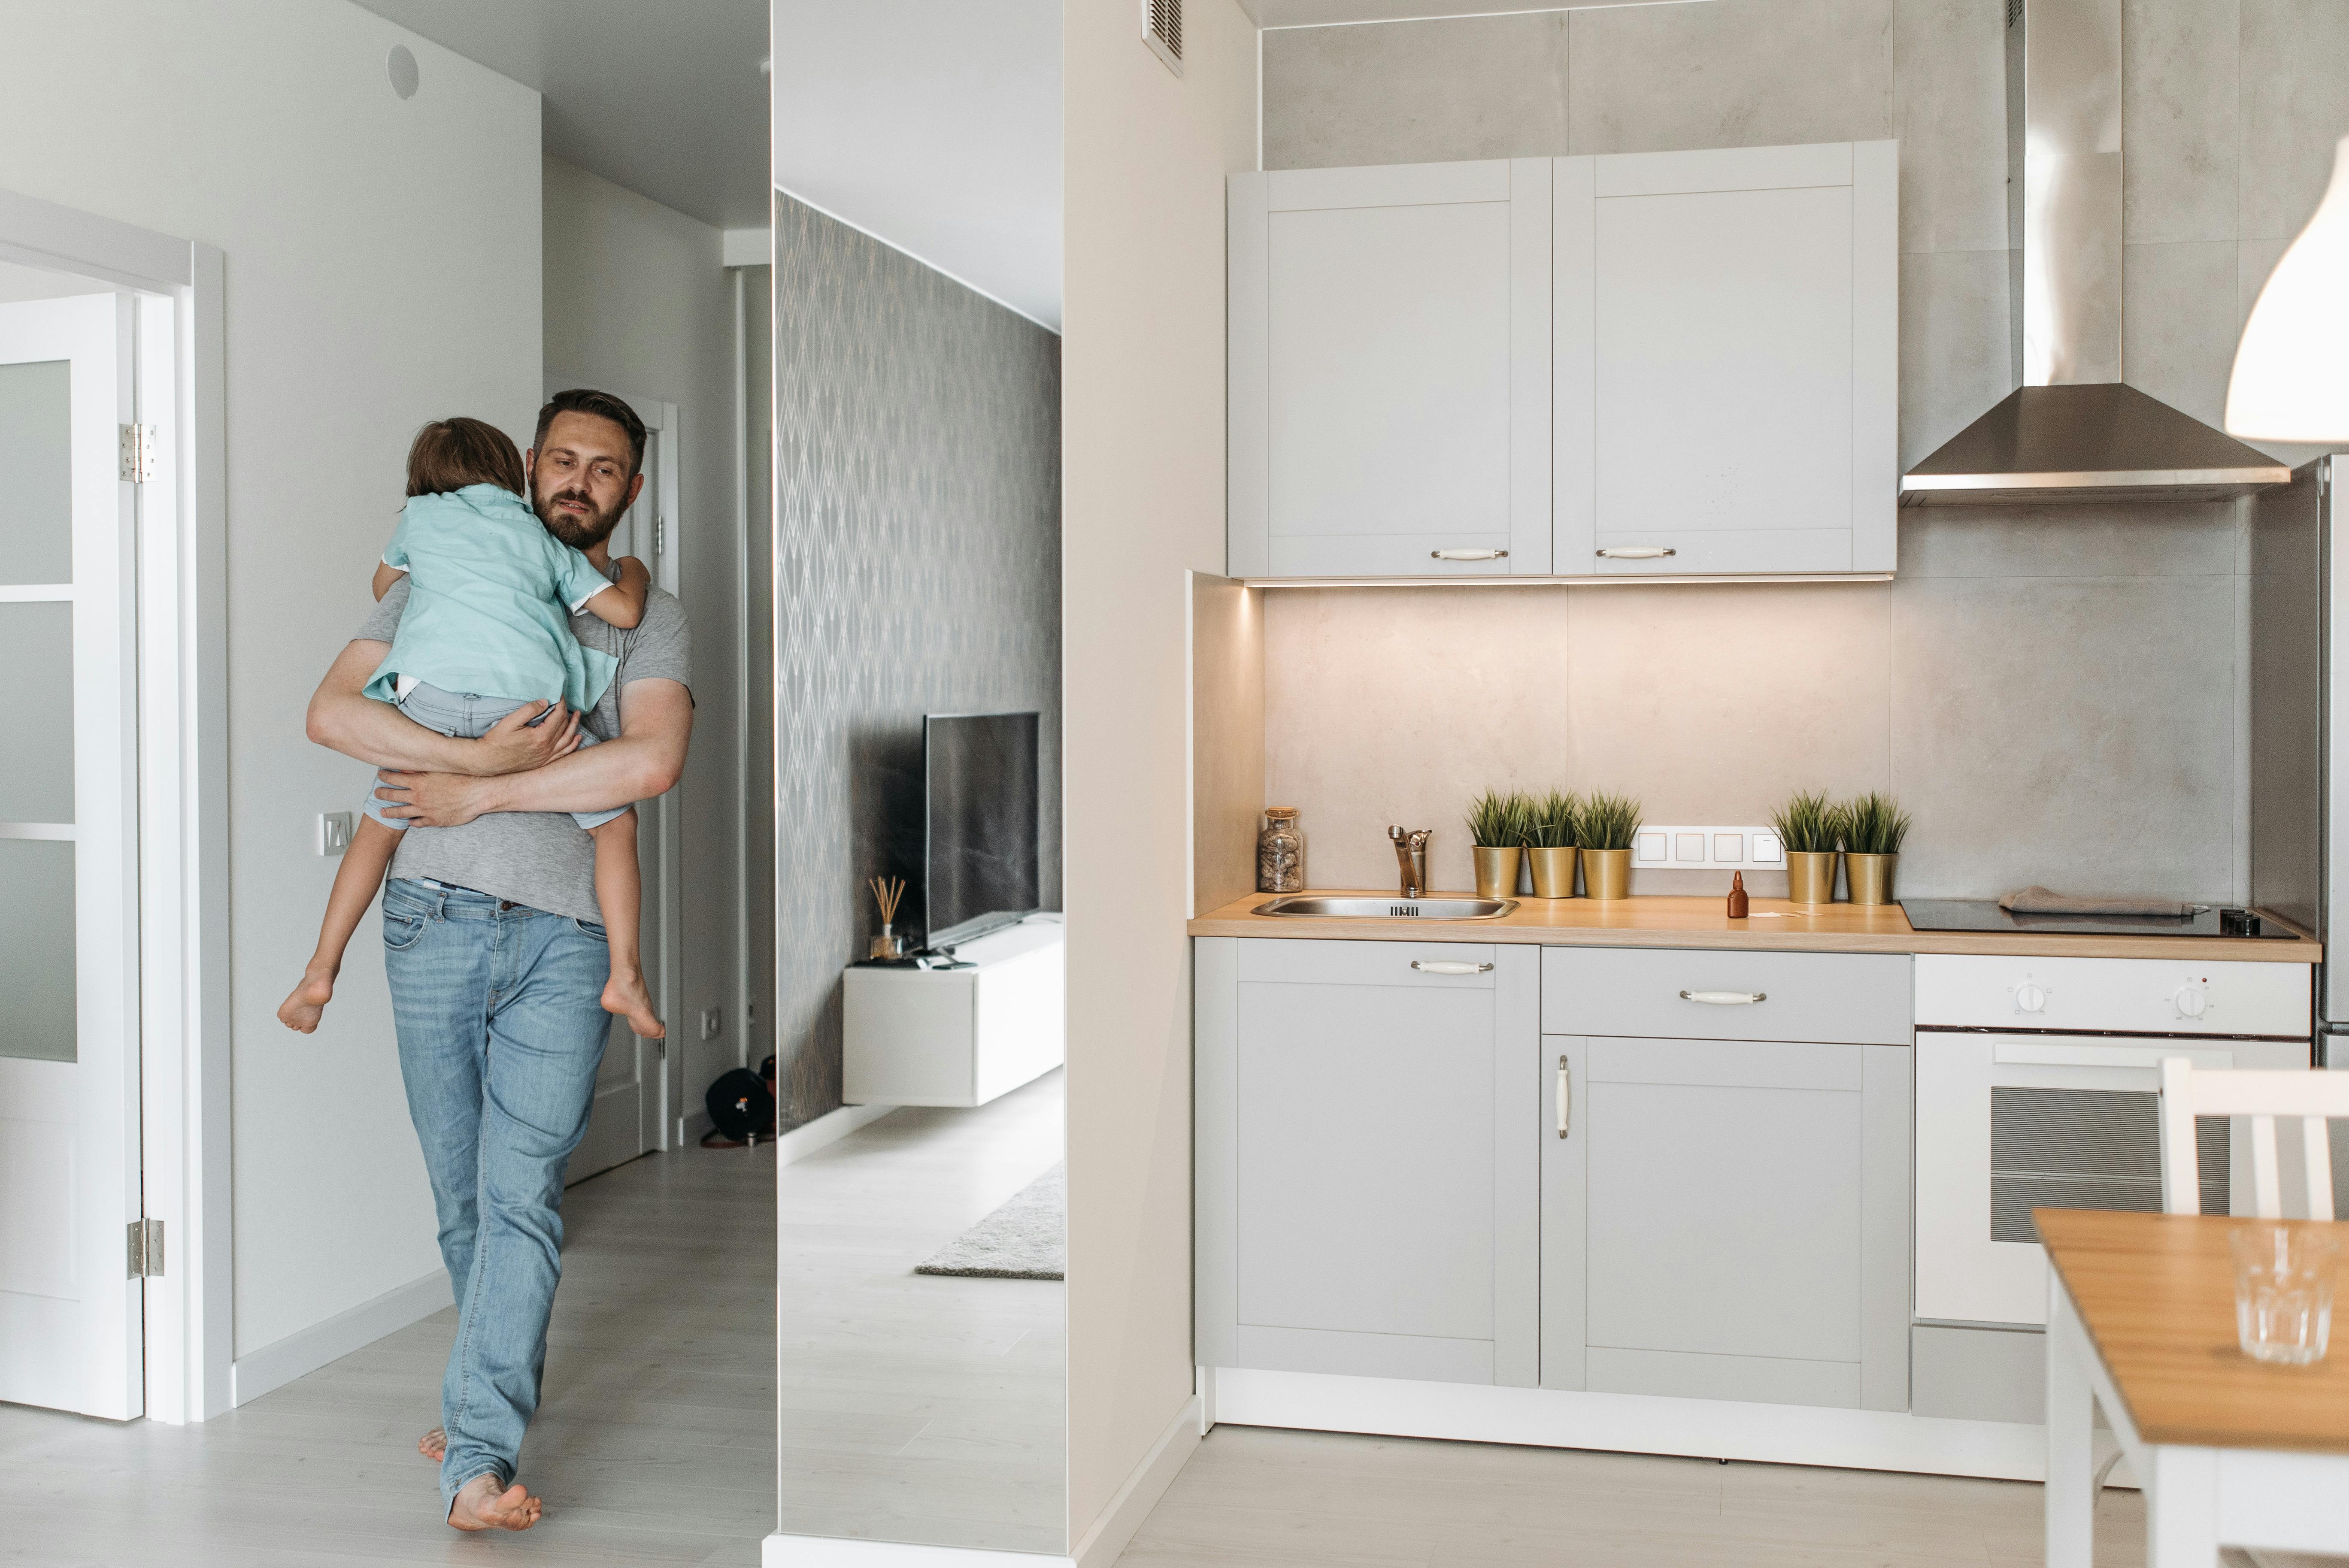 A man carrying a boy into a kitchen | Source: Pexels